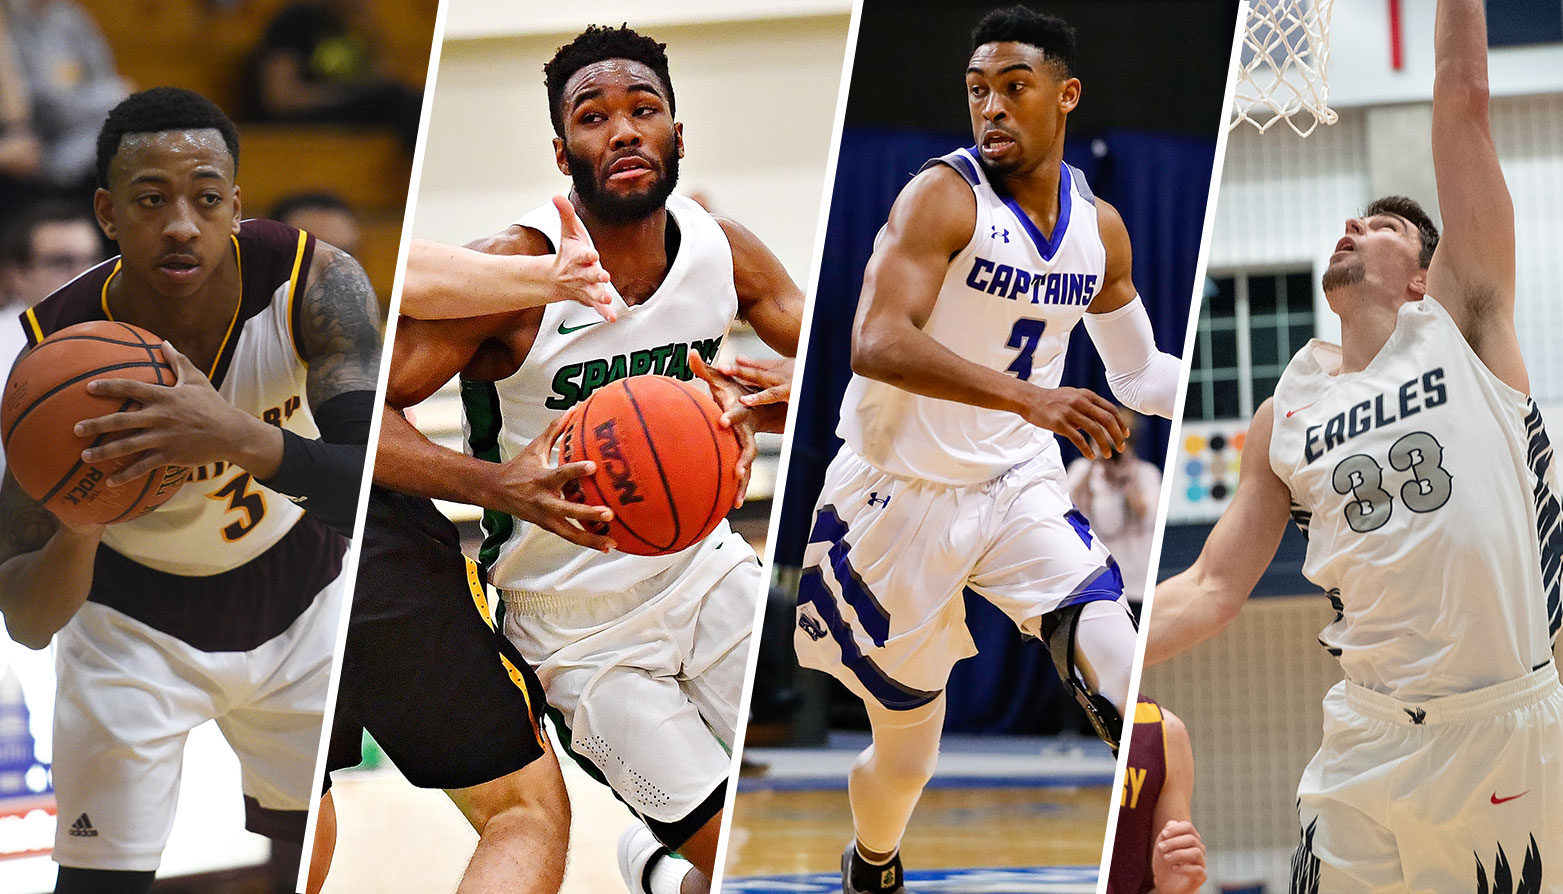 Four CAC Men's Basketball Standouts Earn NABC All-District Recognition